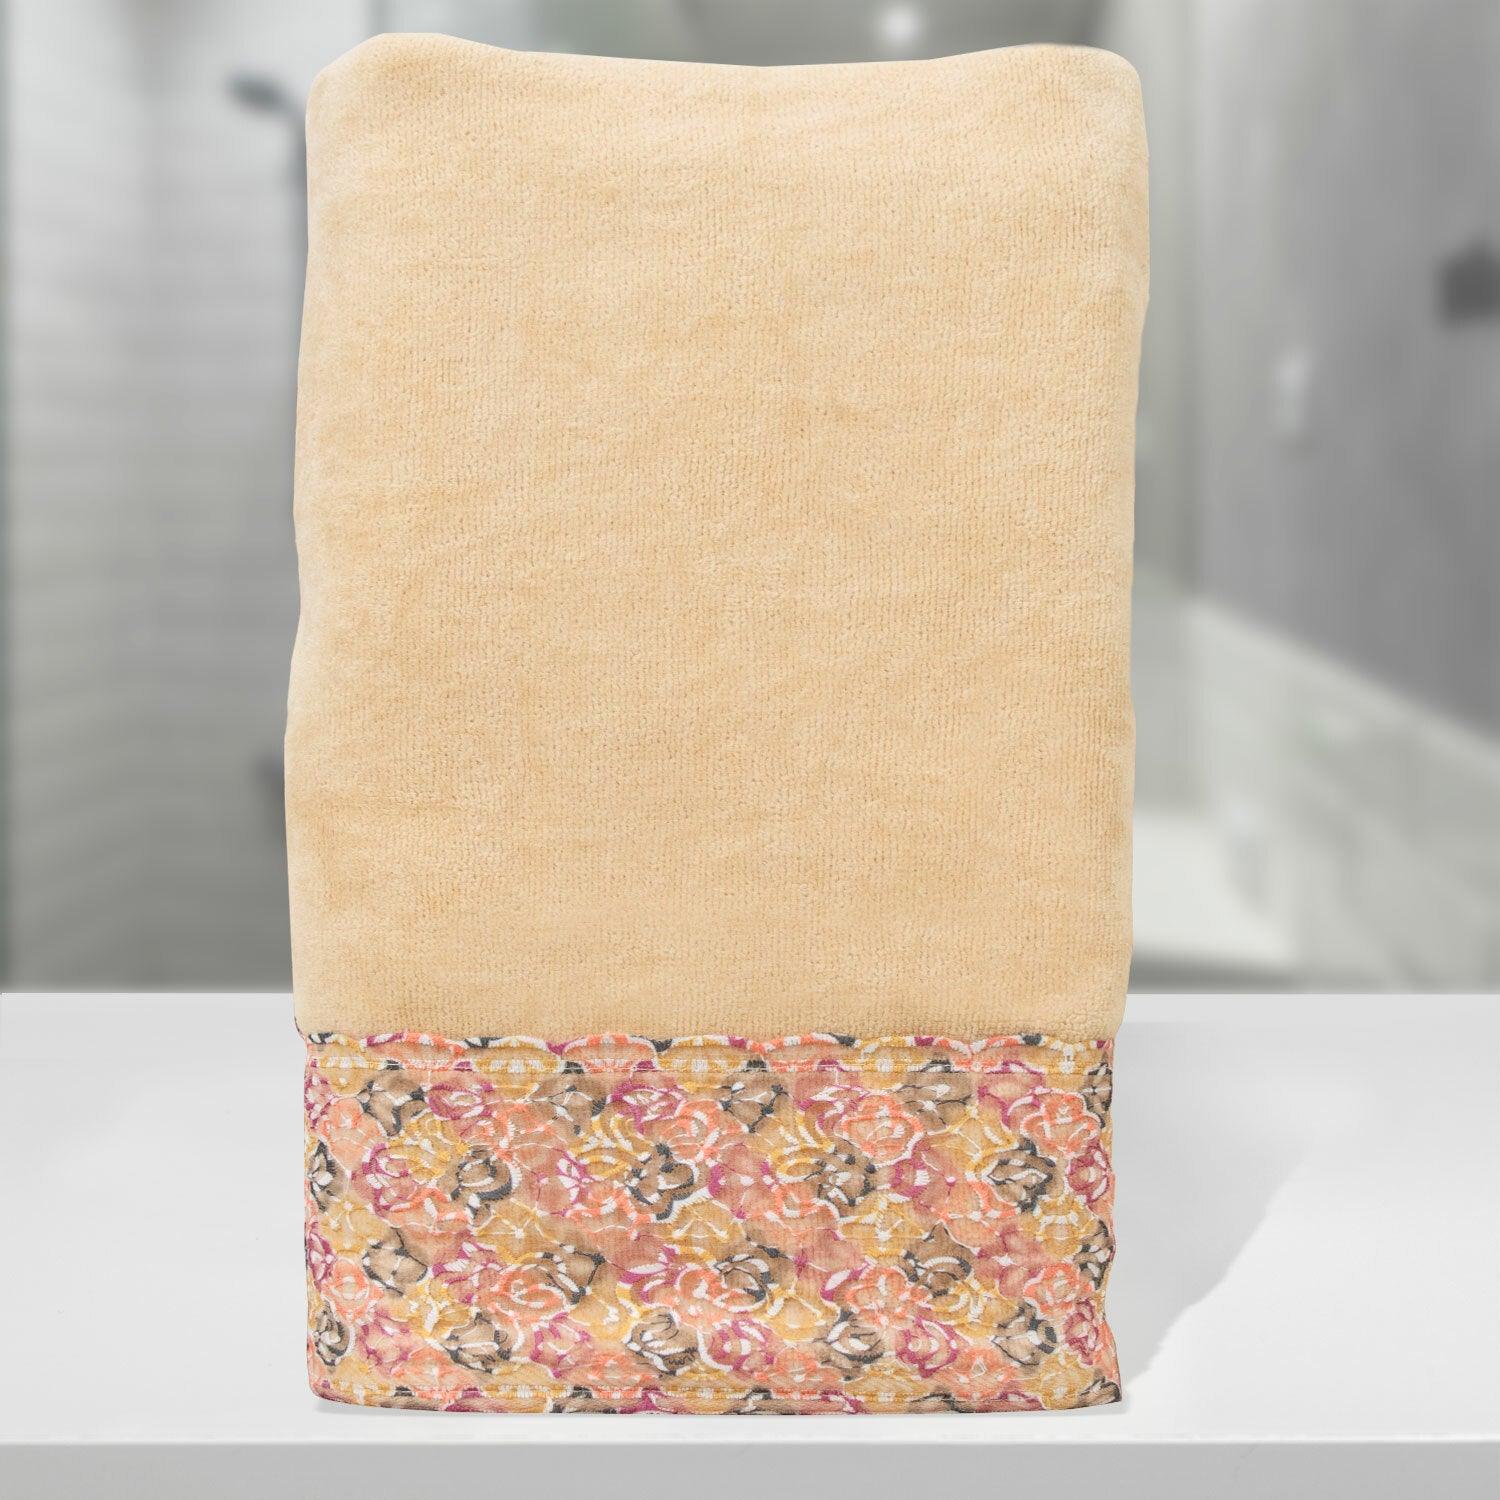 Prima Lace 100% Cotton Bath Towel | Ultra Soft, Highly Absorbent Luxurious Towels